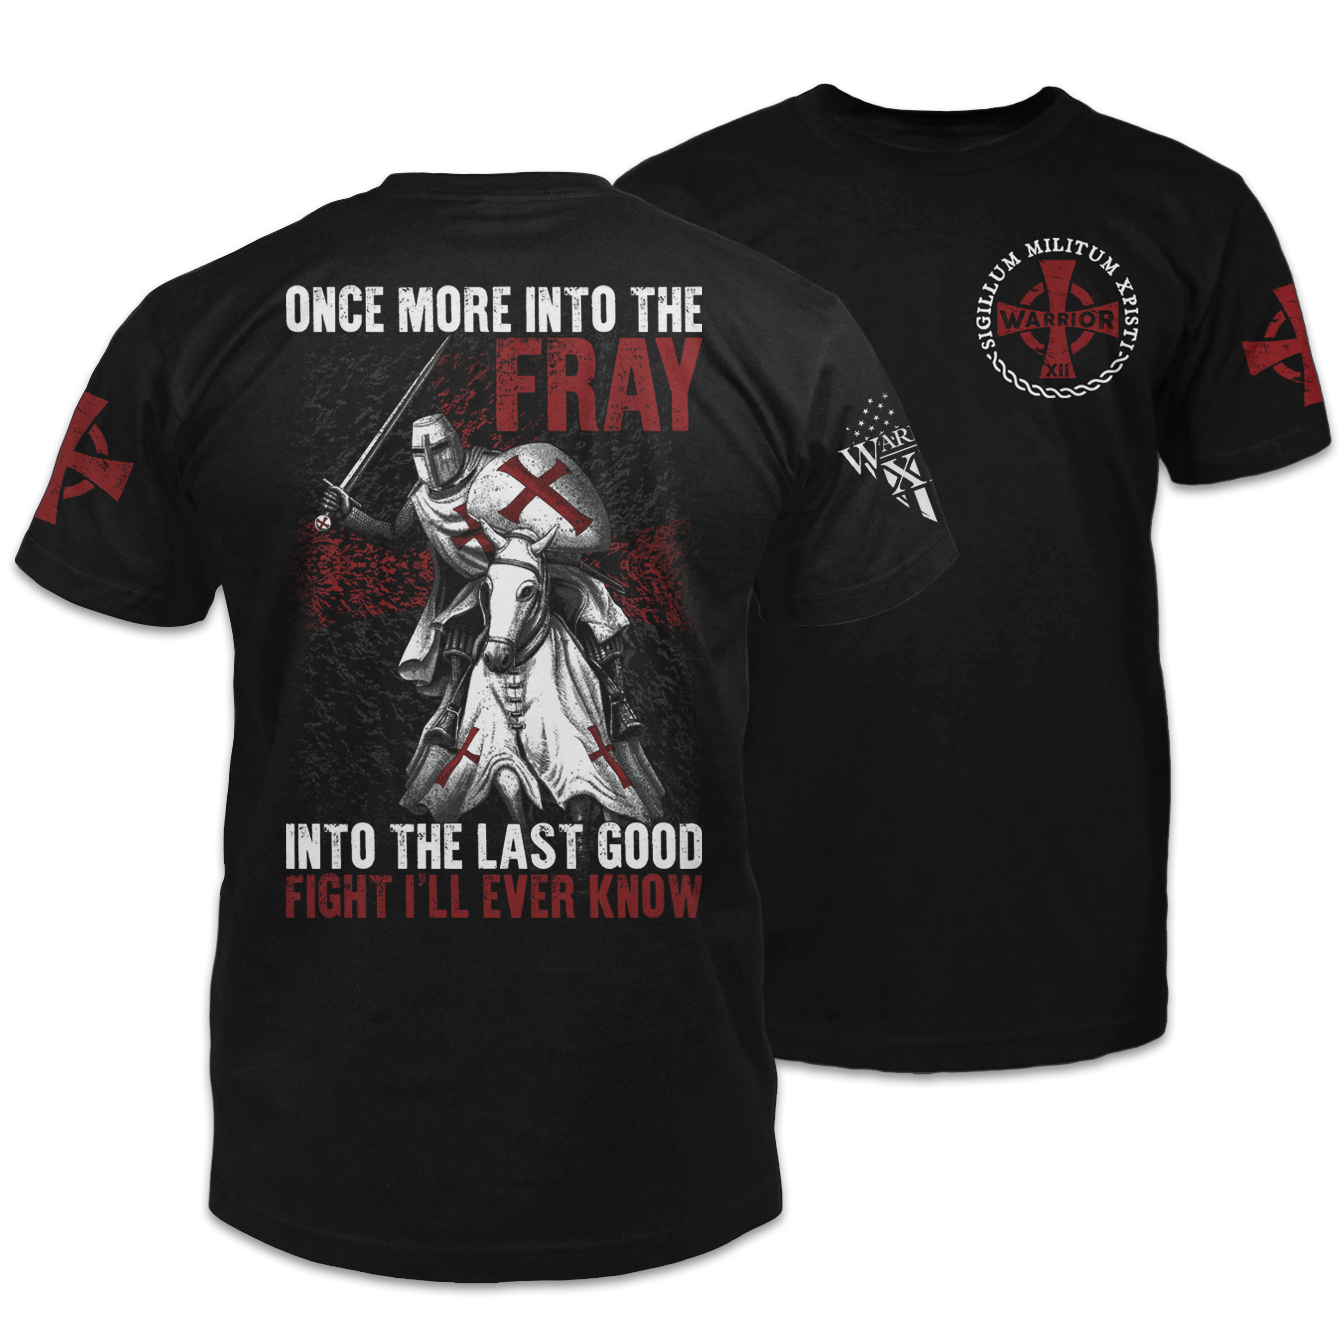 Front & back black t-shirt with the words "Once more into the fray, into the last good fight I'll ever know" with a knights templar ready for battle printed on the shirt.